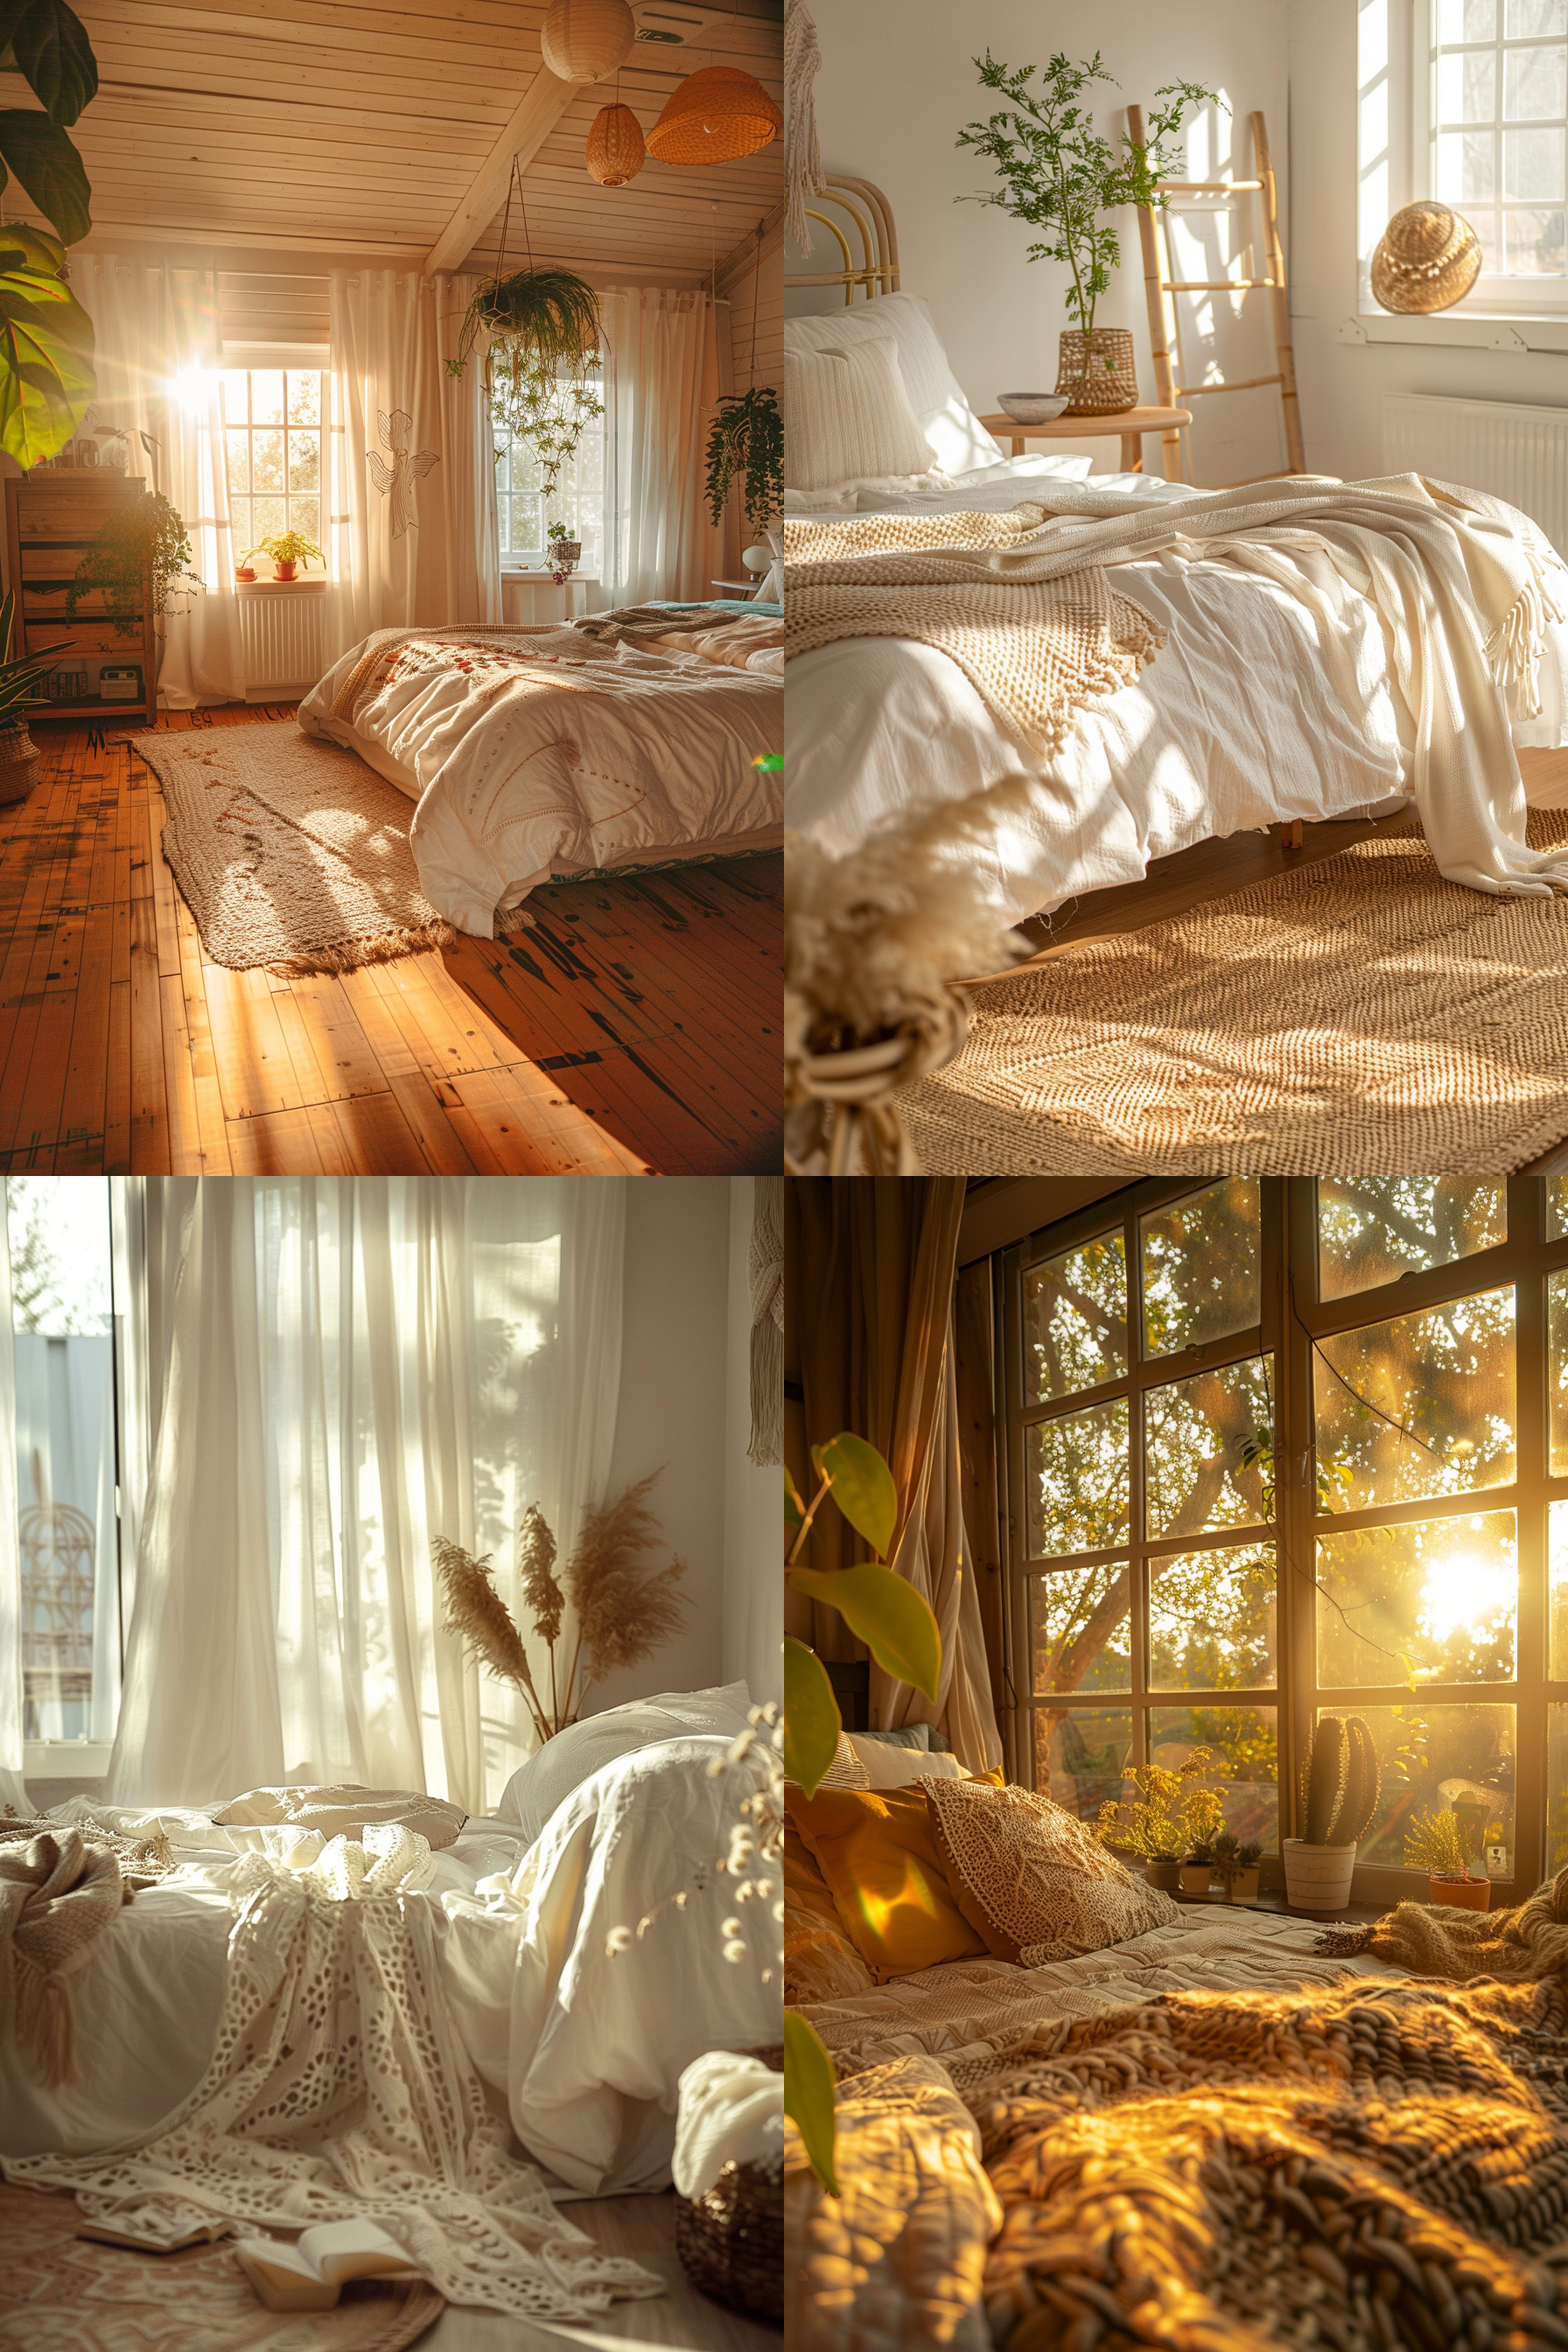 Four cozy bedroom interiors bathed in warm sunlight with plants and rustic decor elements.